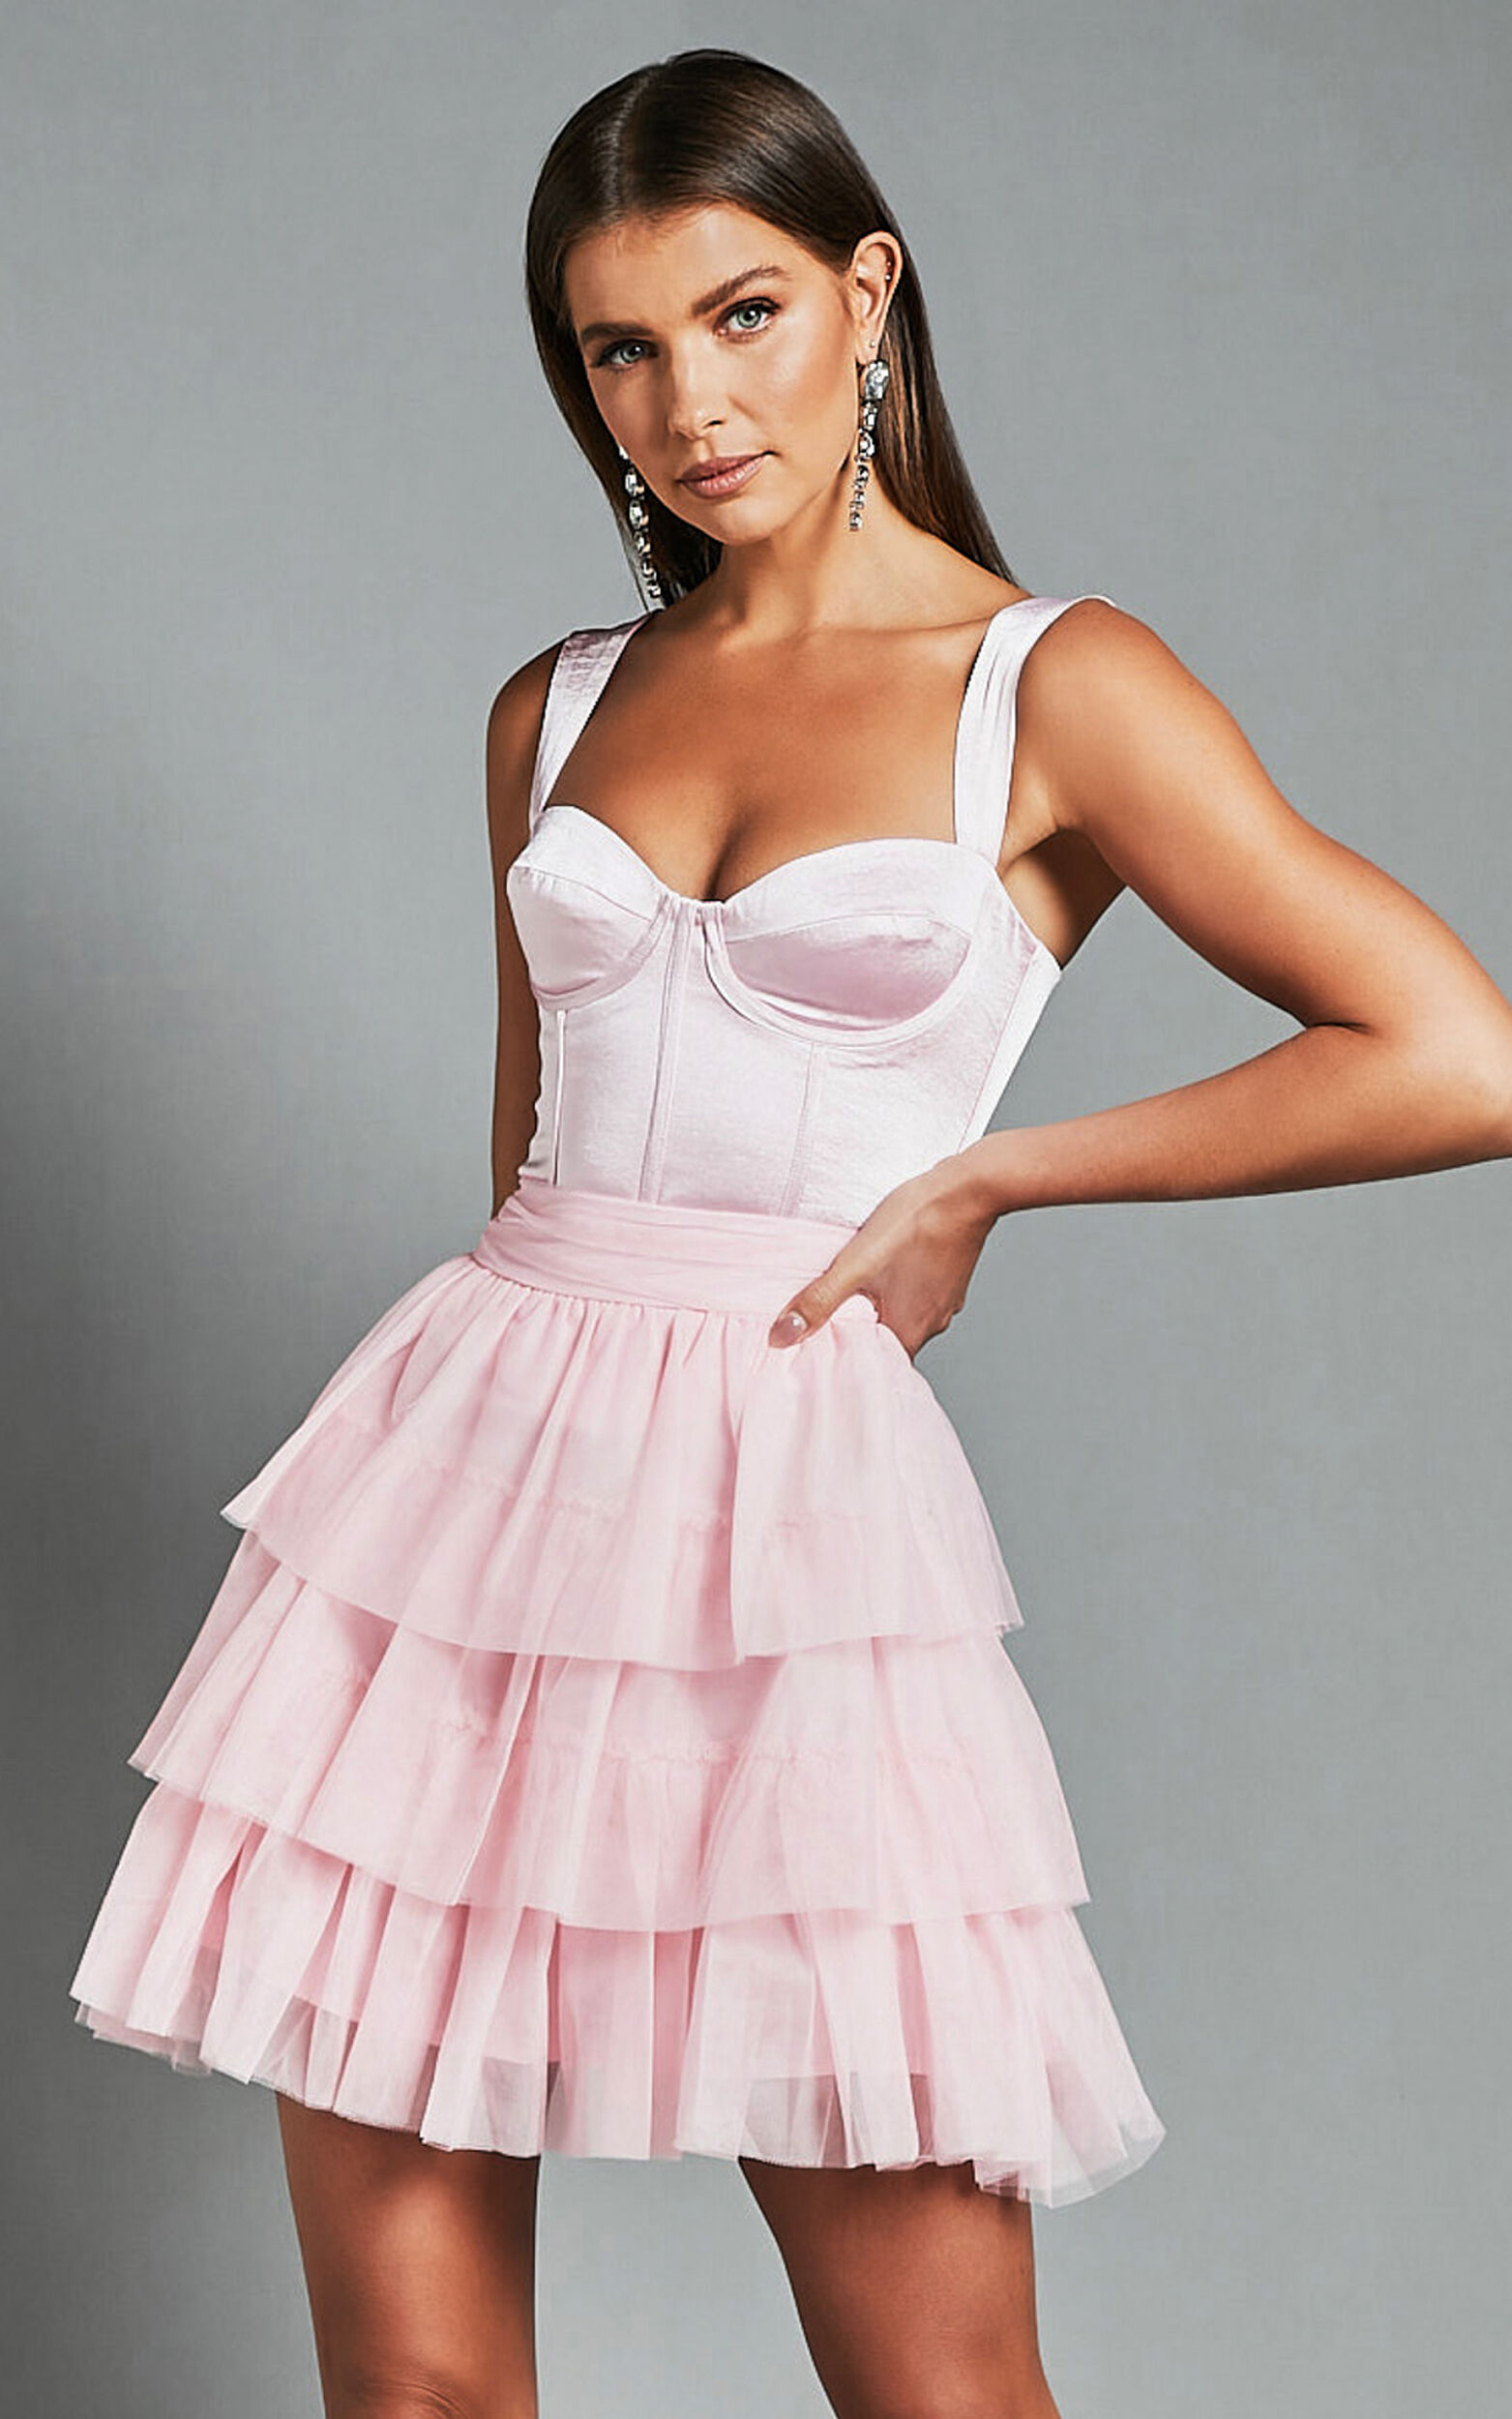 Aulaire Mini Skirt - Tiered Tulle Skirt in Blush - 04, PNK1